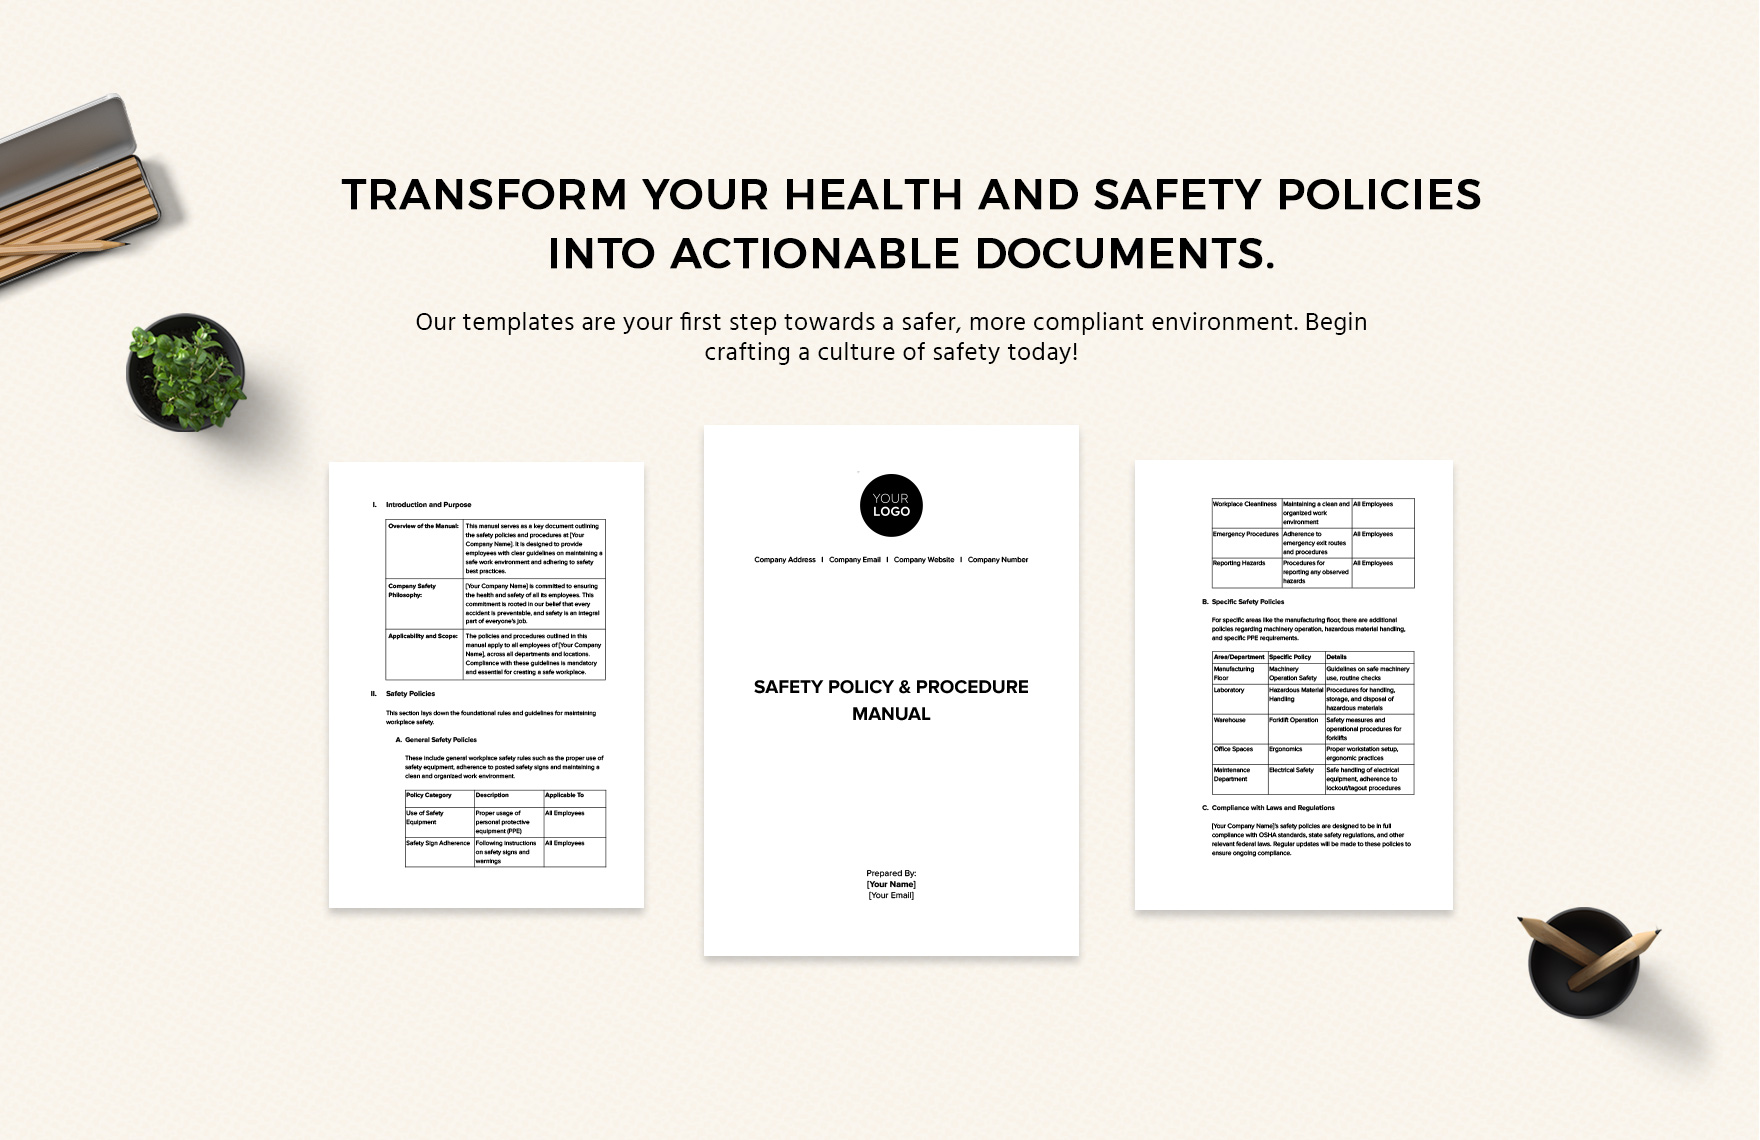 Safety Policy & Procedure Manual Template